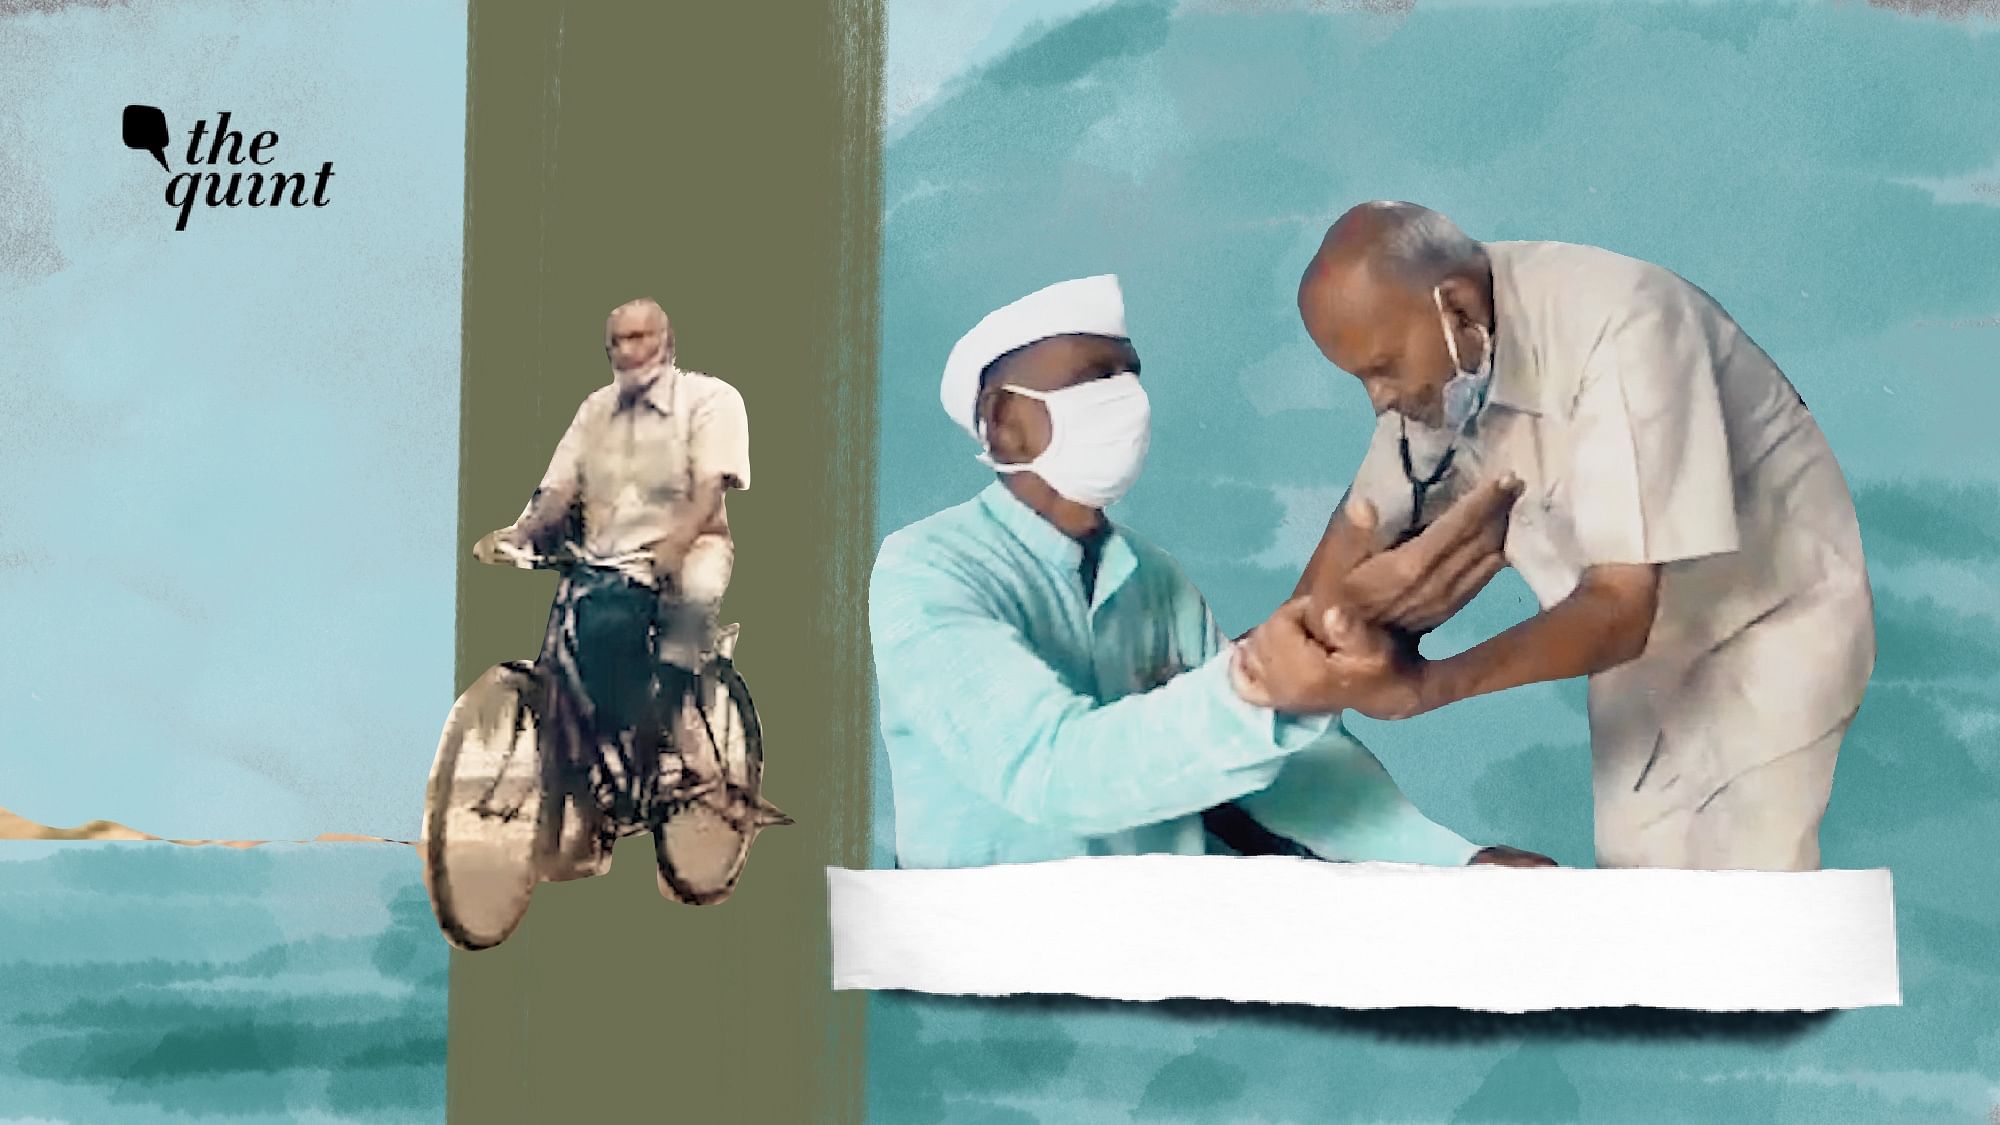 Dr Ramchandra Dandekar cycles over 10 km daily to visit his patients in Maharashtra's Chandrapur district.